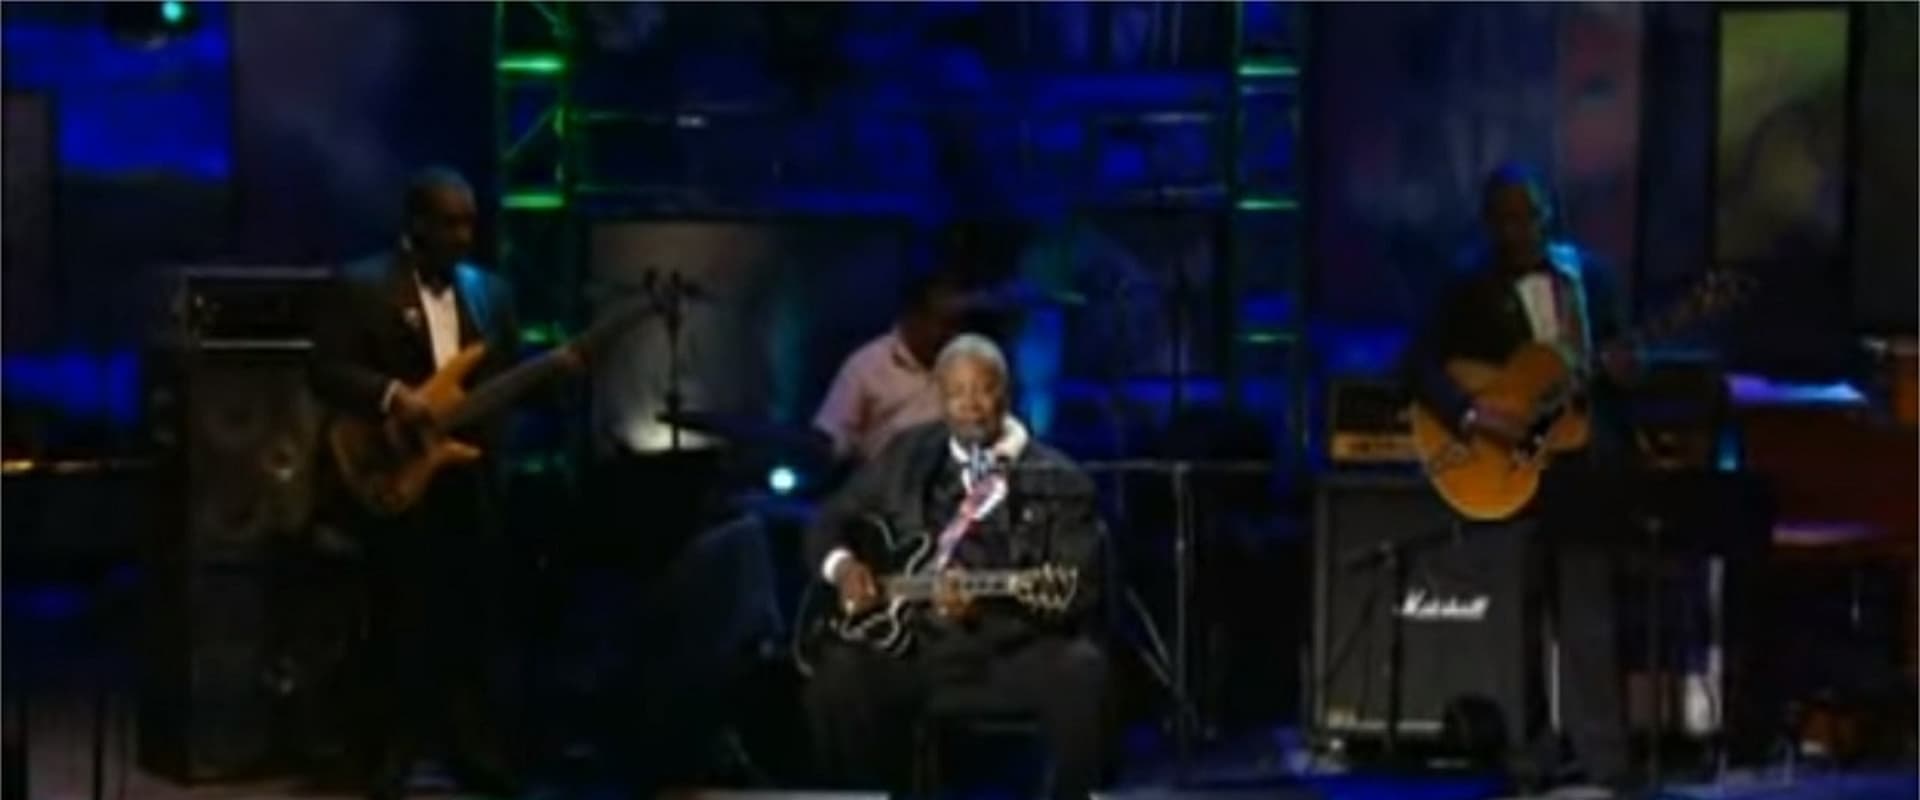 B.B. King: Live By Request